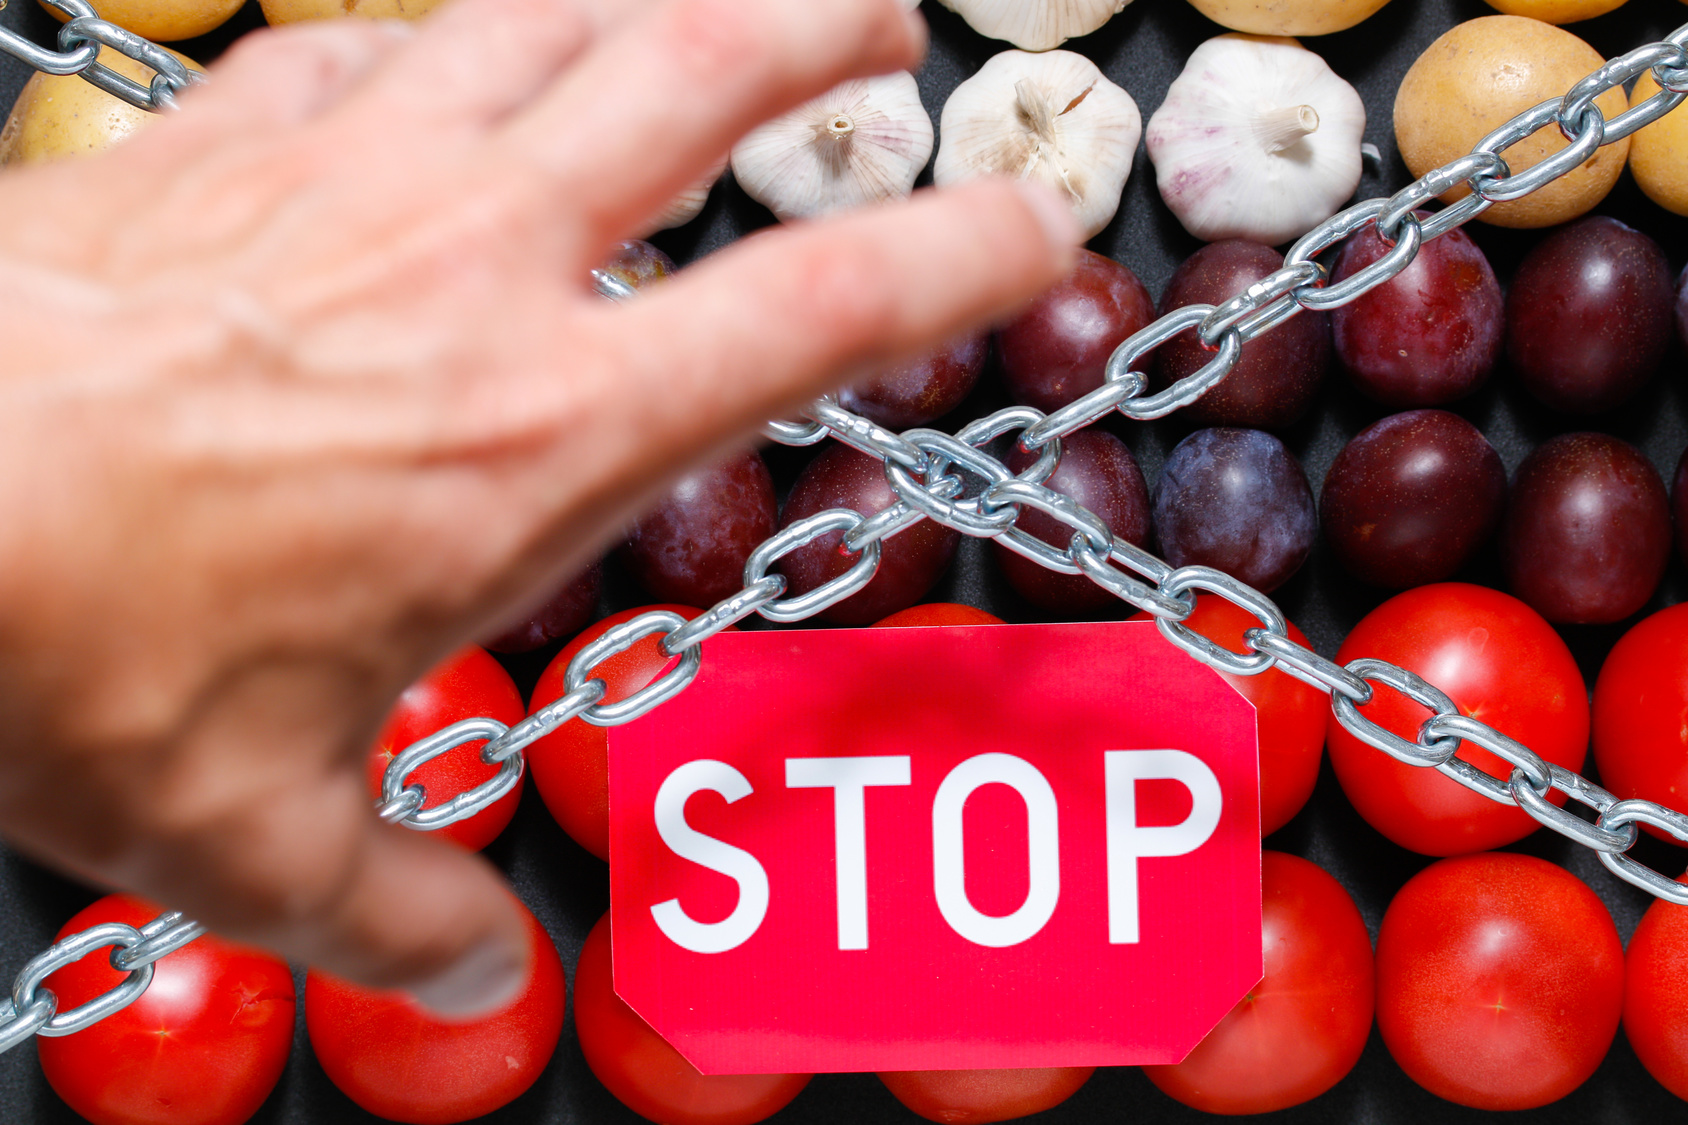 Chain, a 'stop' sign and a grabbing hand on a vegetables background, in context of sanctions and extermination of food in Russia